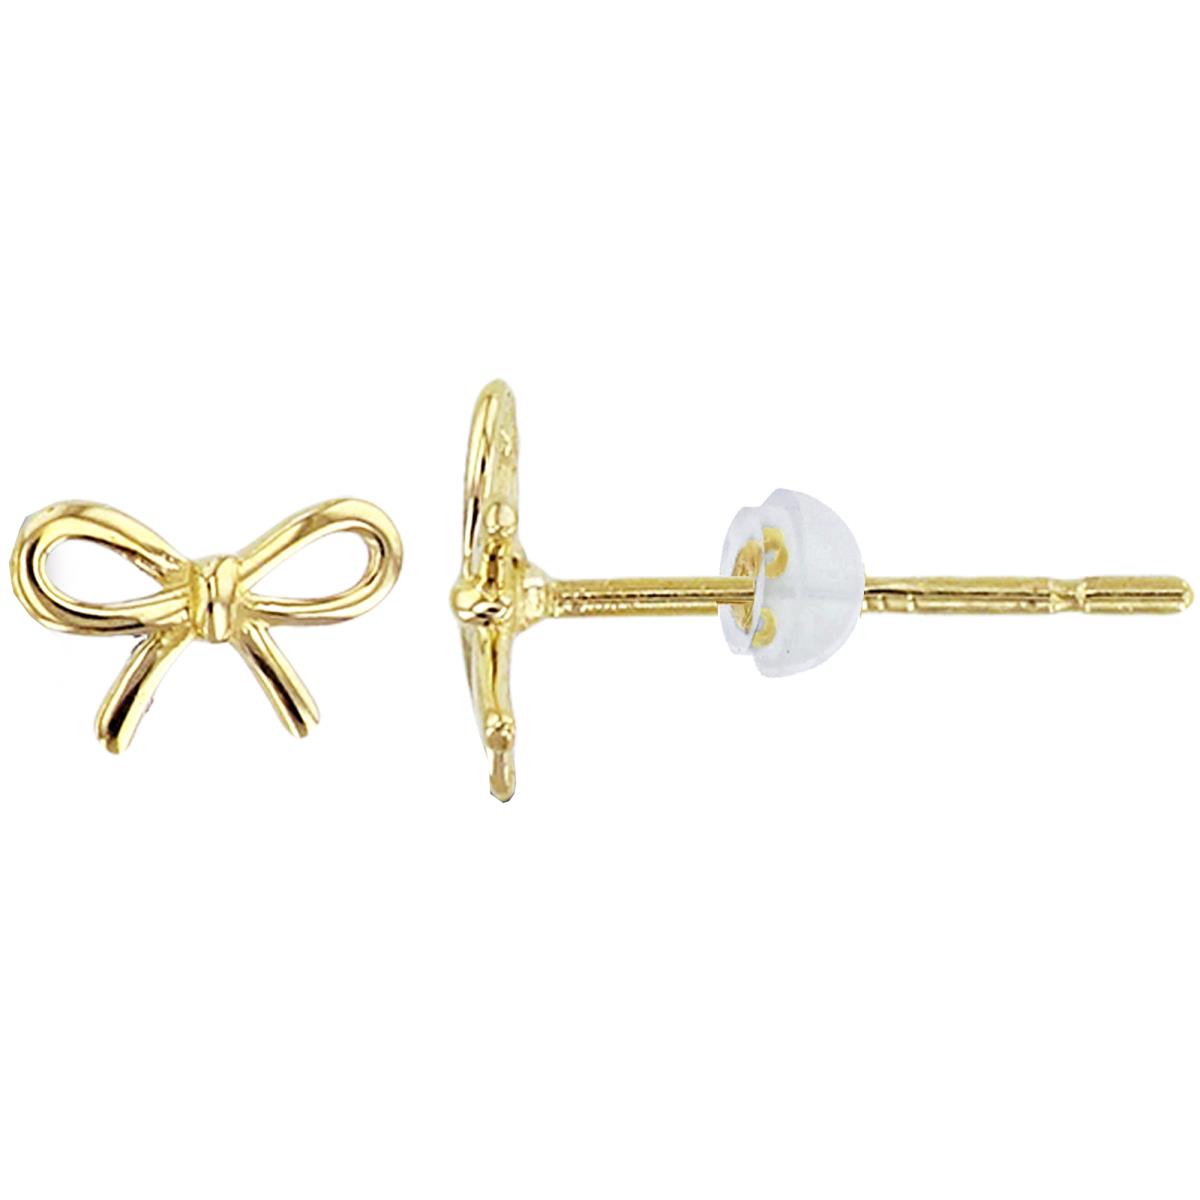 10K Yellow Gold High Polish Ribbon Bow Studs with Silicon Backs